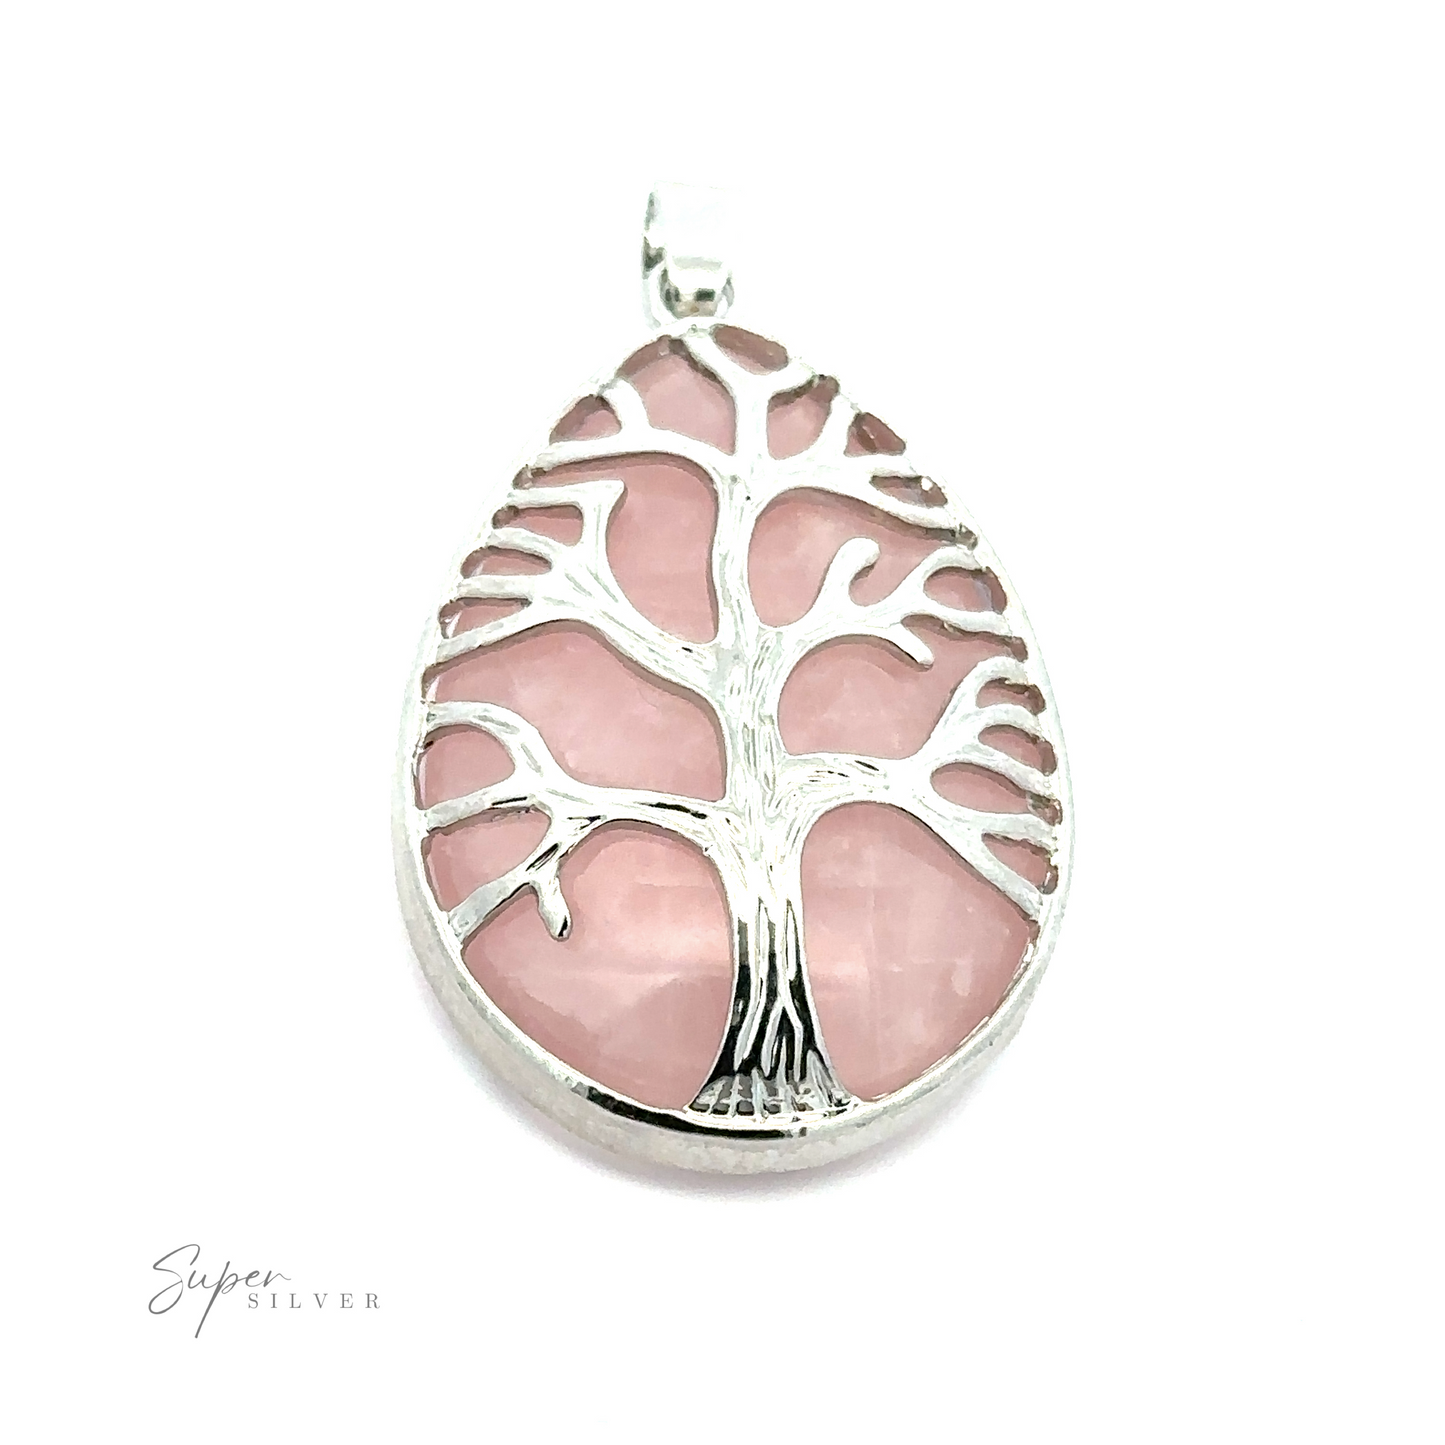 A Teardrop Shape Stone with Silver Plated Tree Of Life Pendant. The bottom left corner features the "Super Silver" logo in cursive.